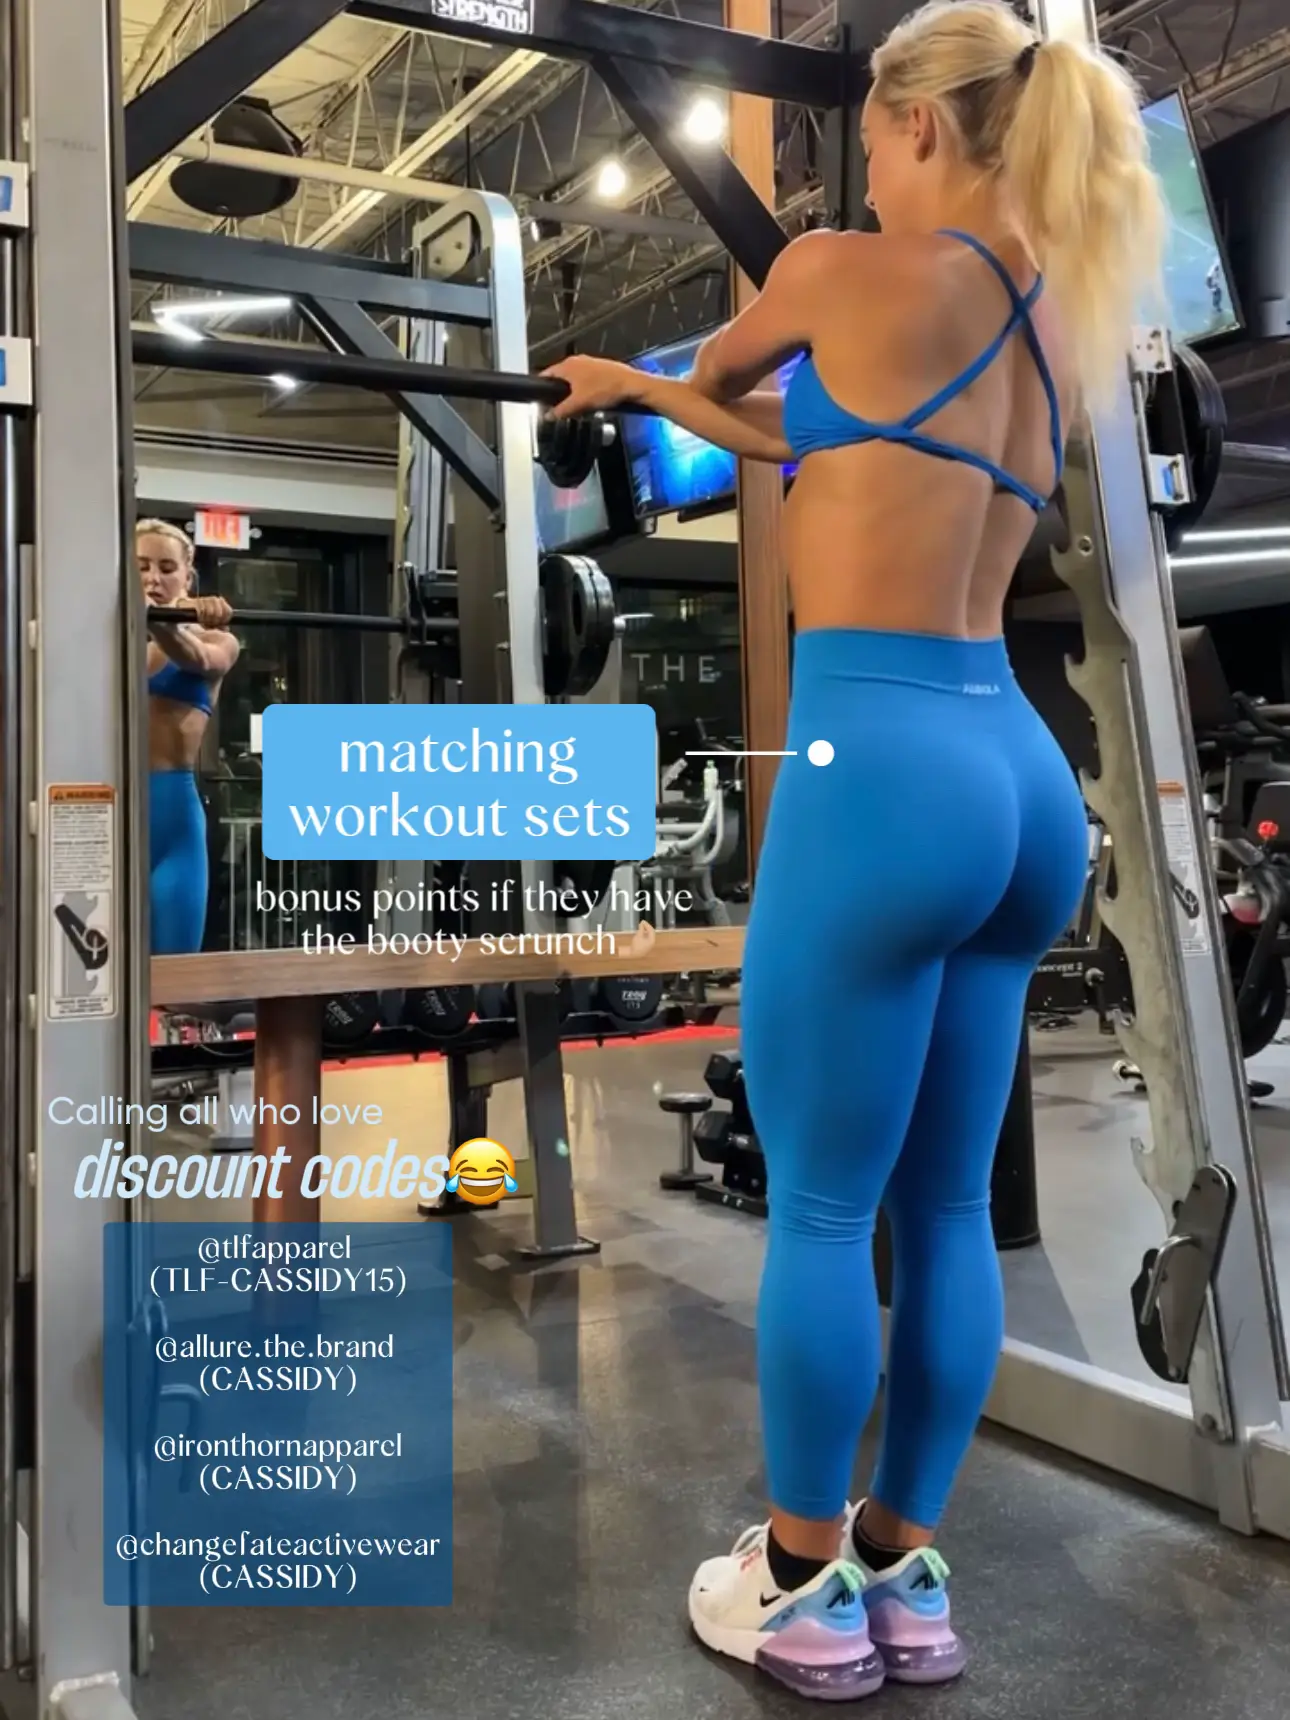 Colombian Butt Lifting Effect Workout Leggings – MIRACLE BODY NUTRITION